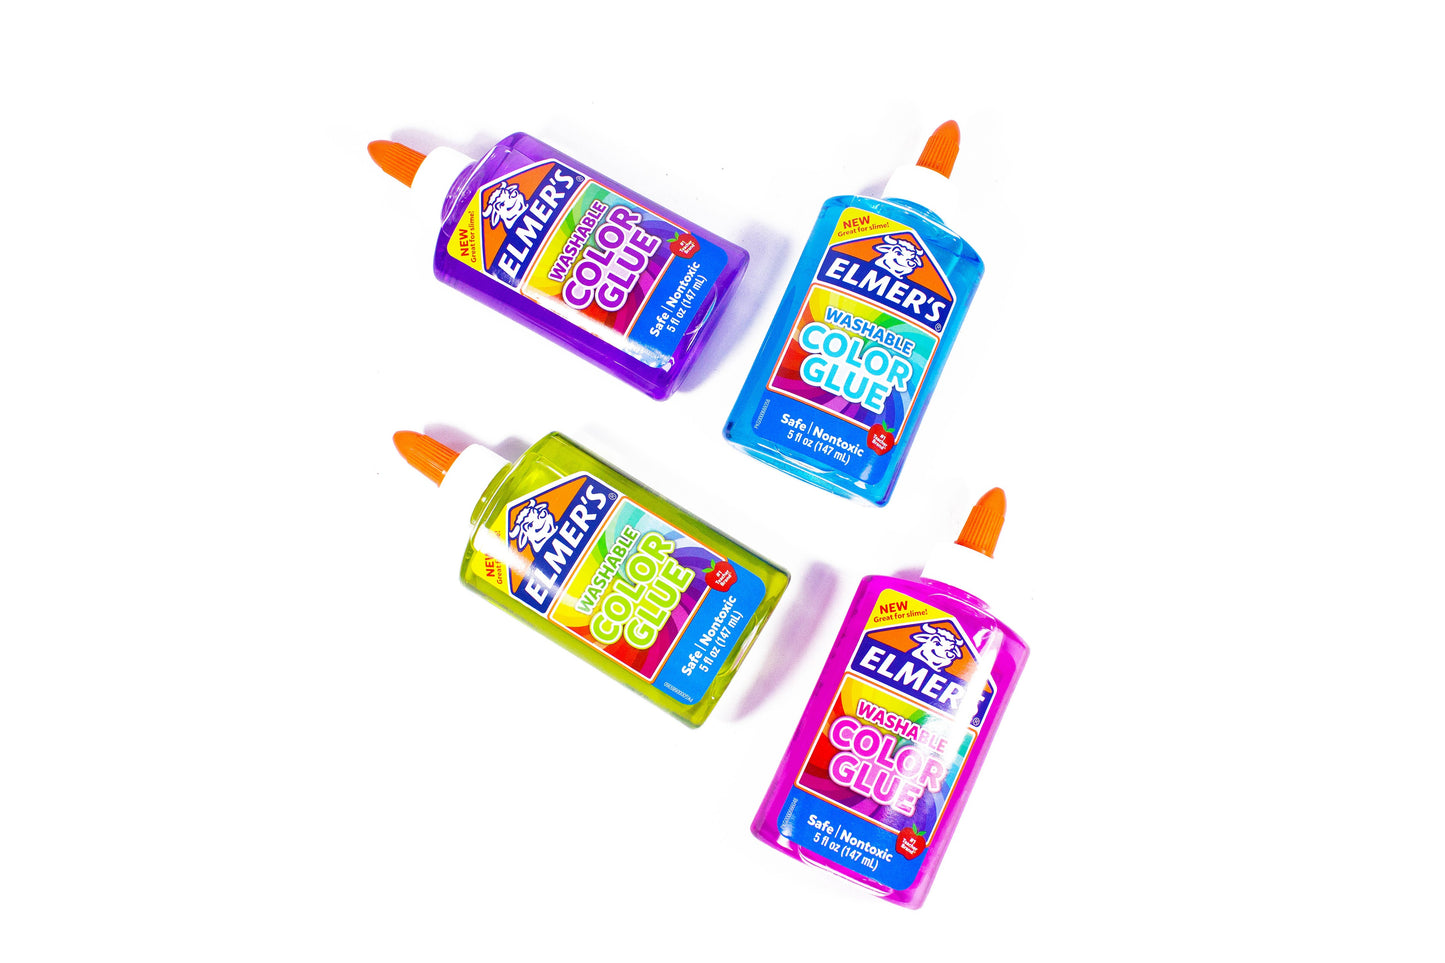 Elmer's Washable Color Glue 5oz | Sold by 3s